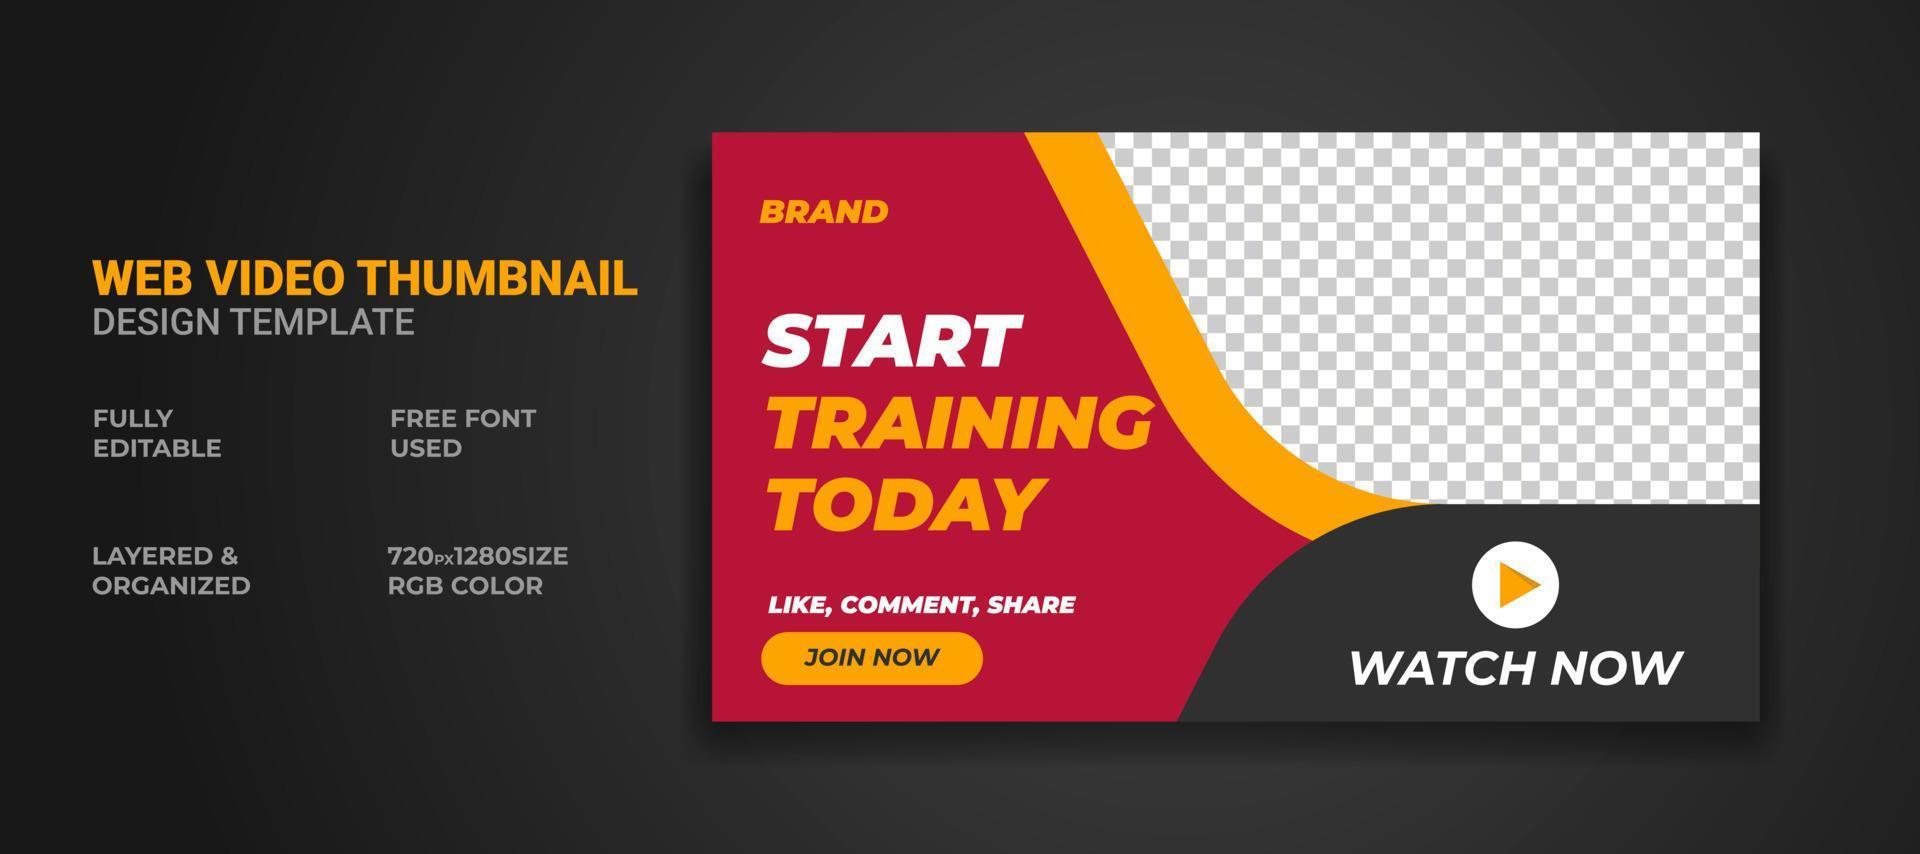 Video thumbnail and web banner template vector